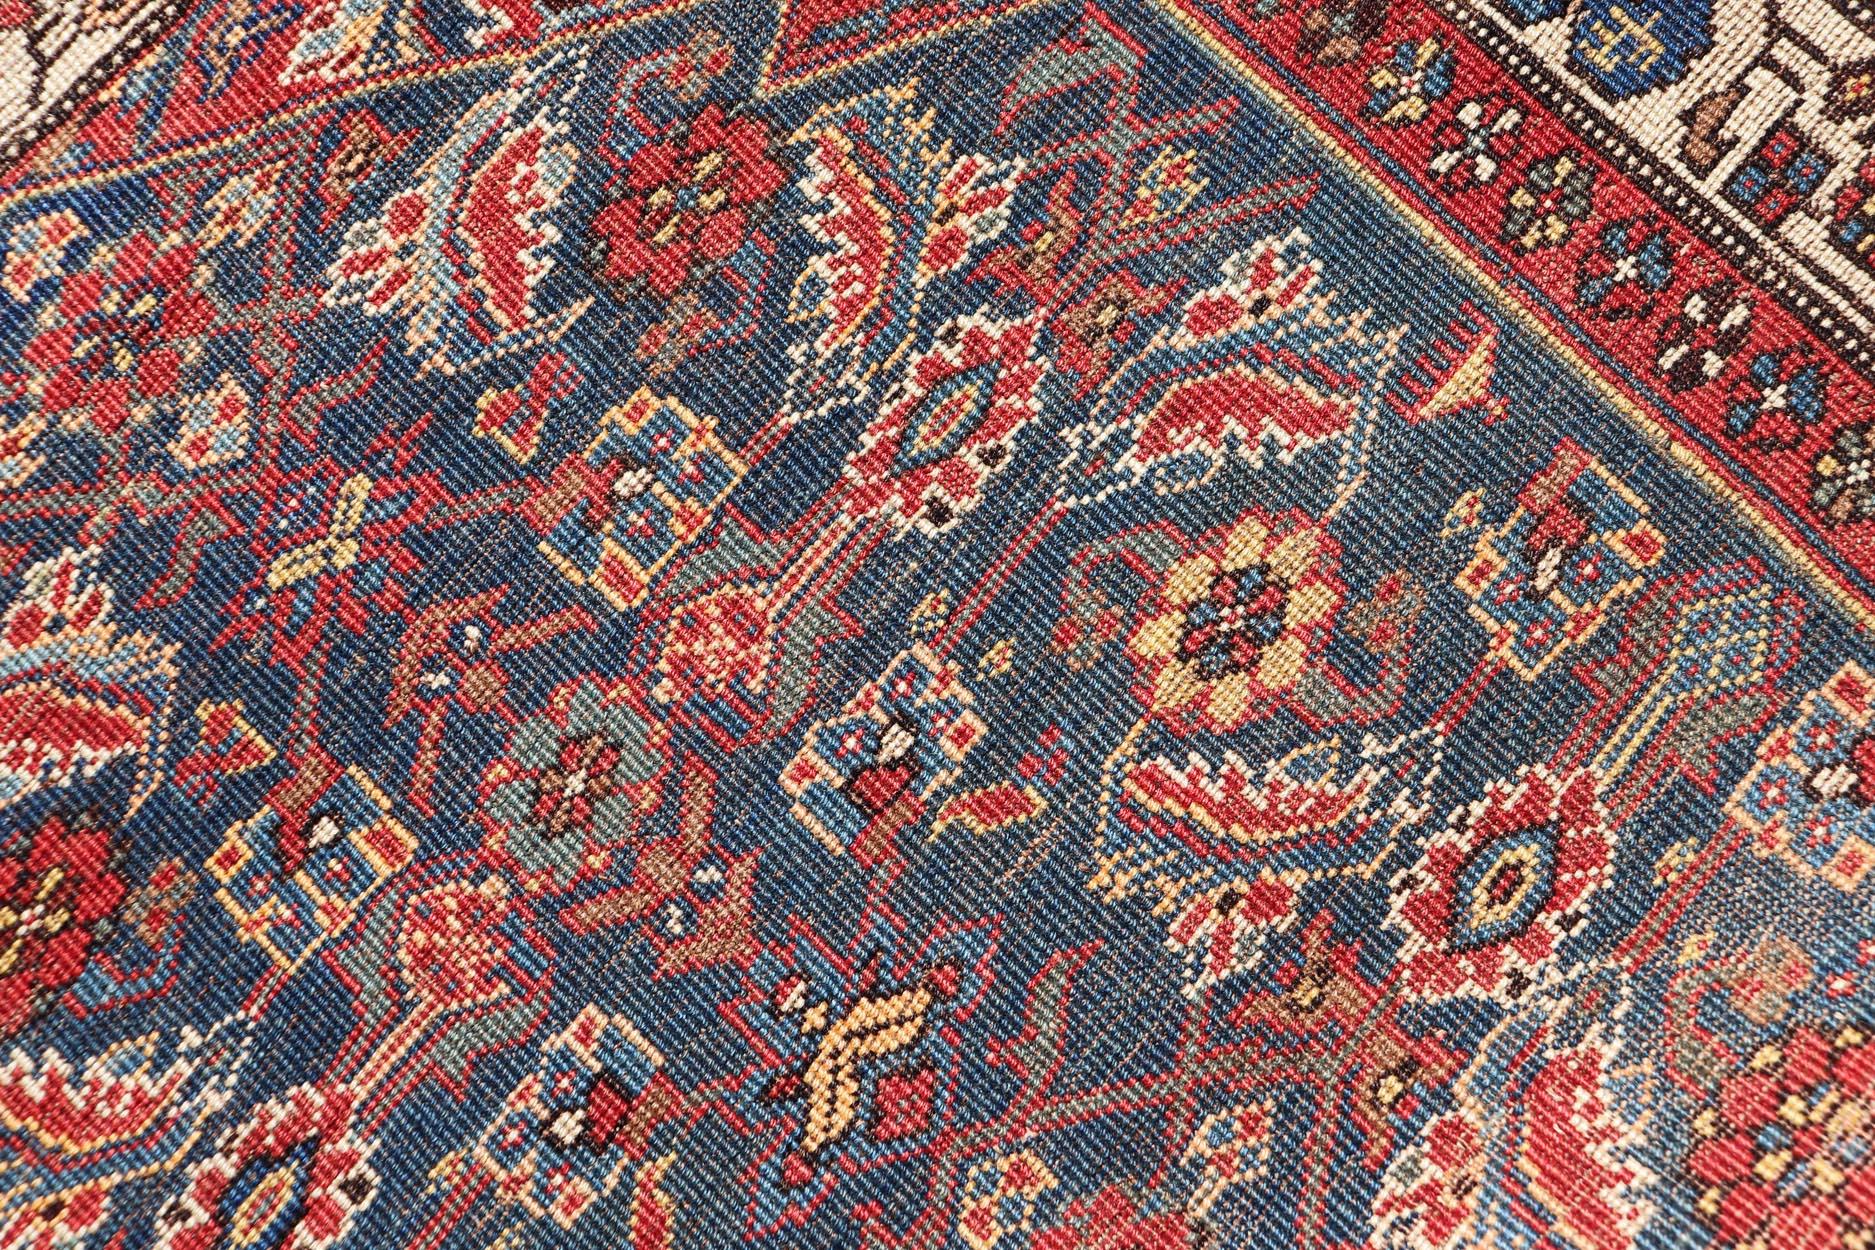 Hand-Knotted Antique Persian Bidjar Rug with Large Floral Motifs in Blue, Red, and Ivory For Sale